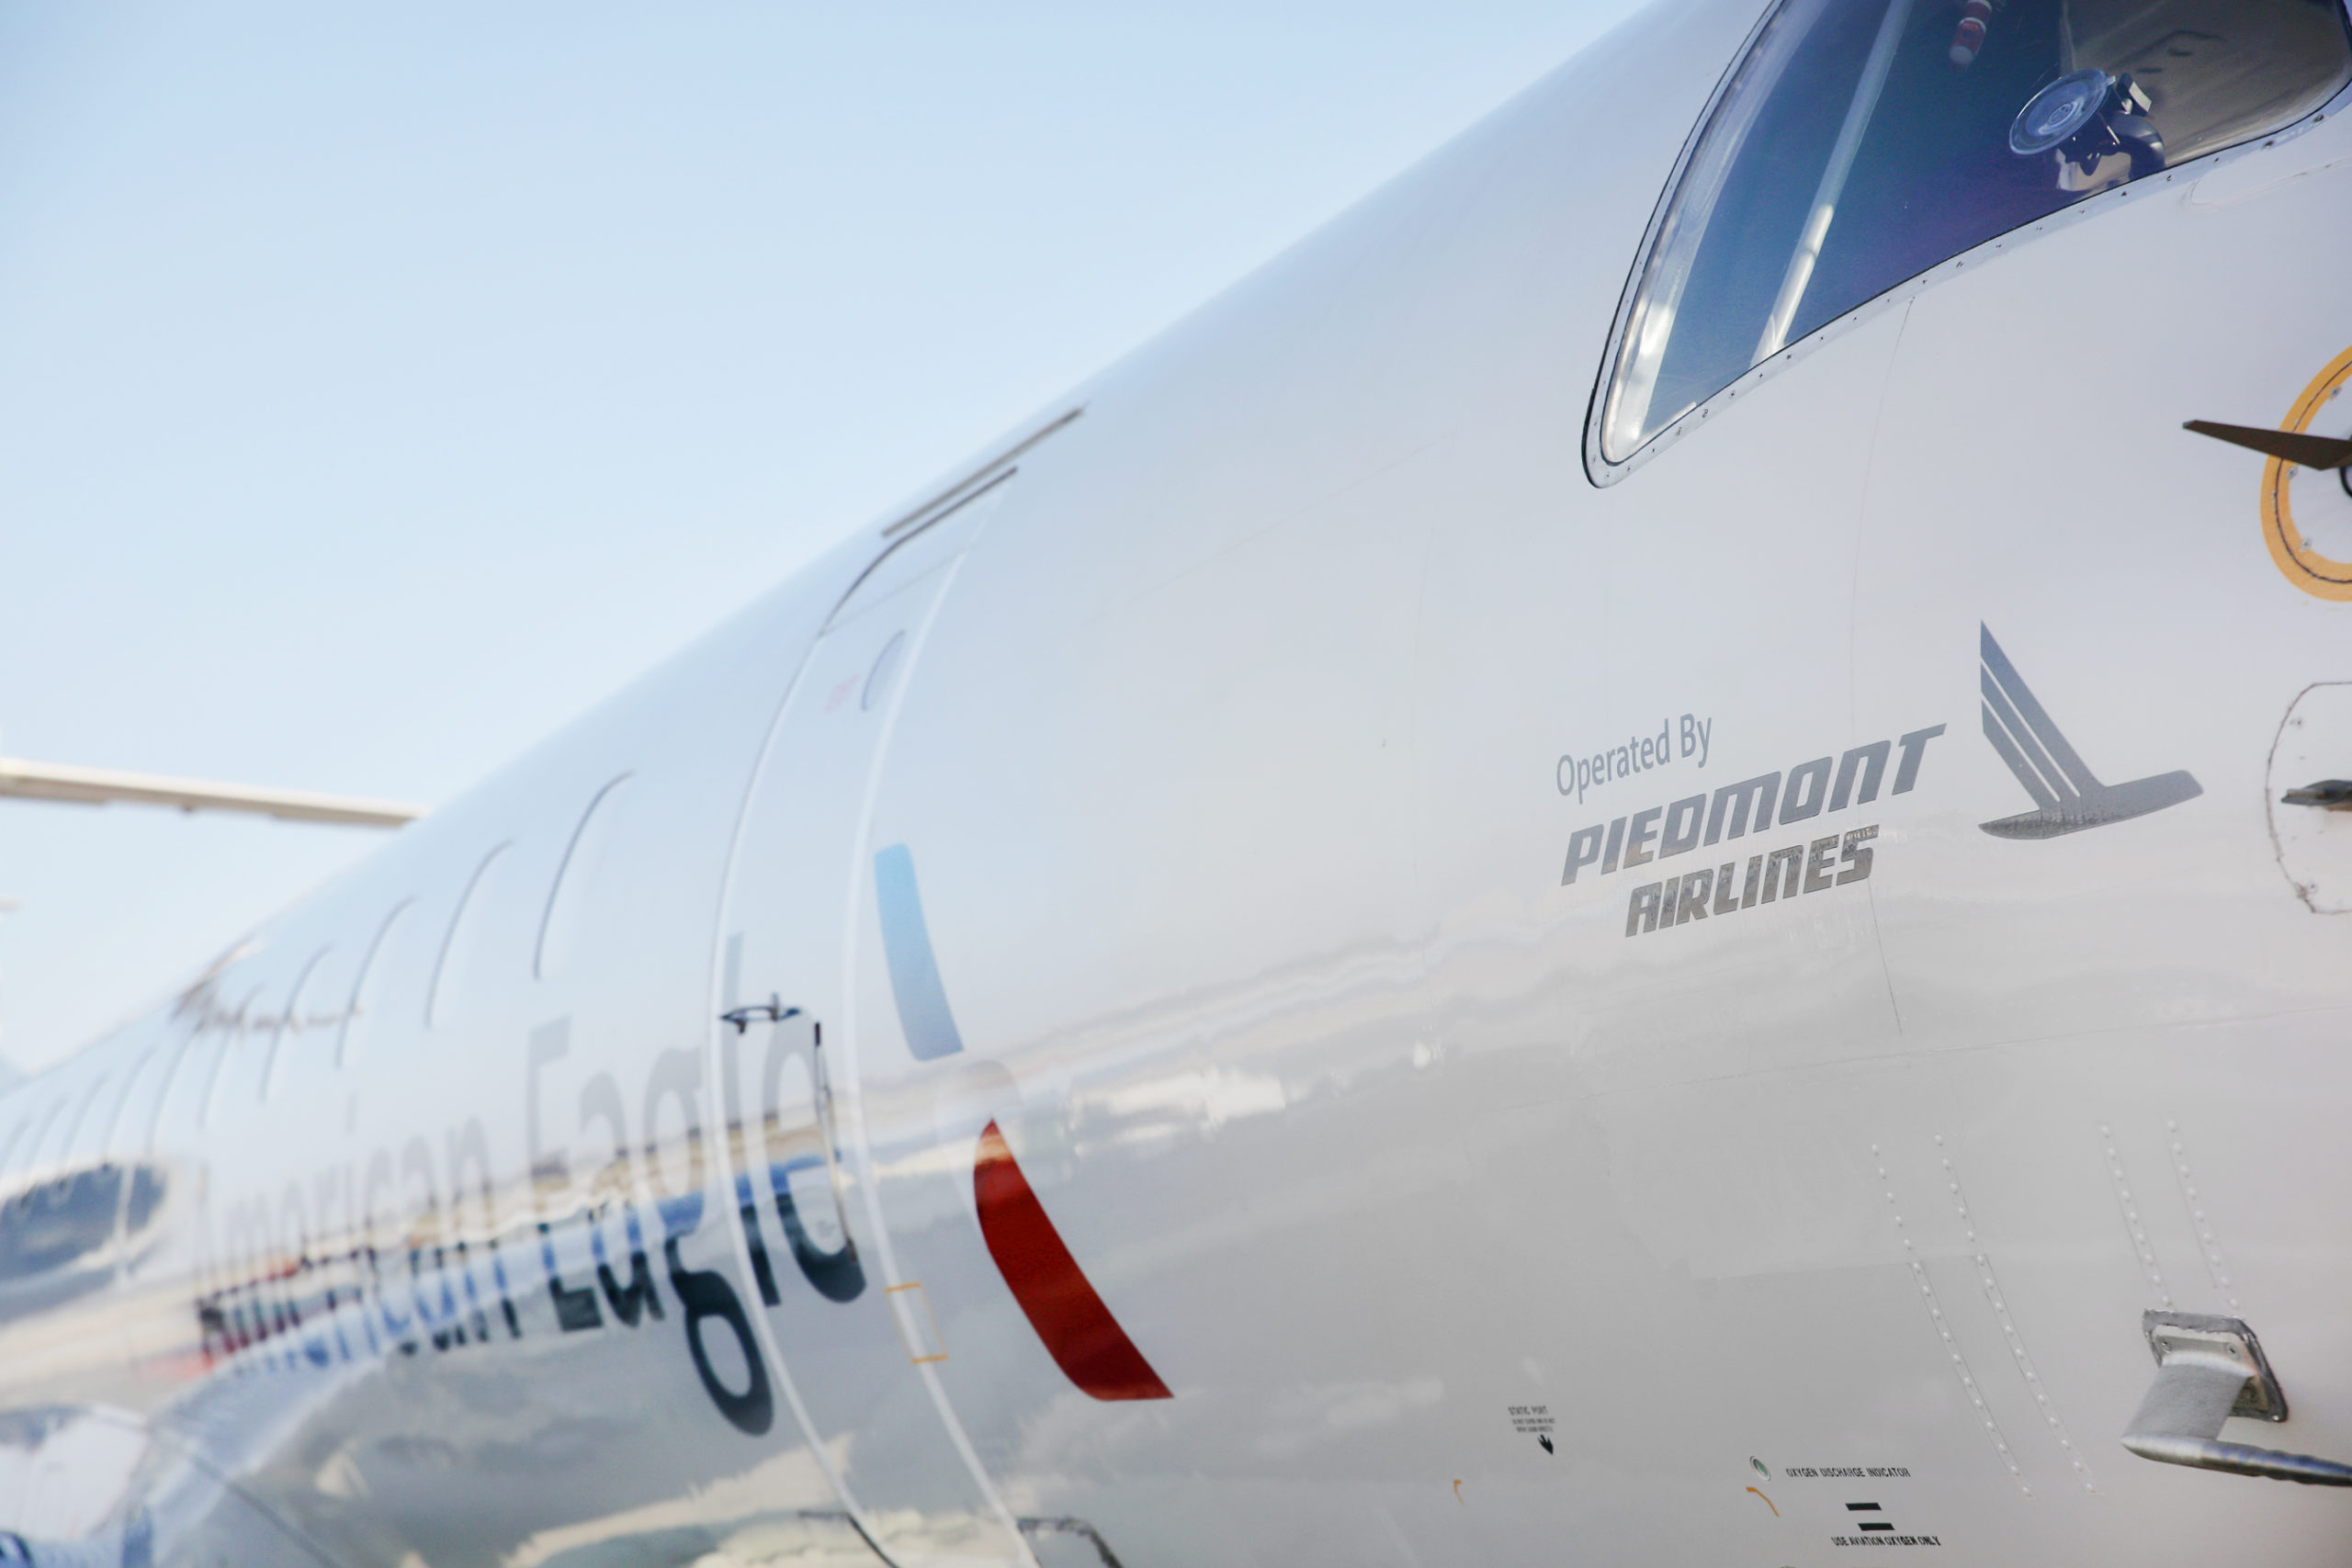 Take your pilot career further at Piedmont Airlines